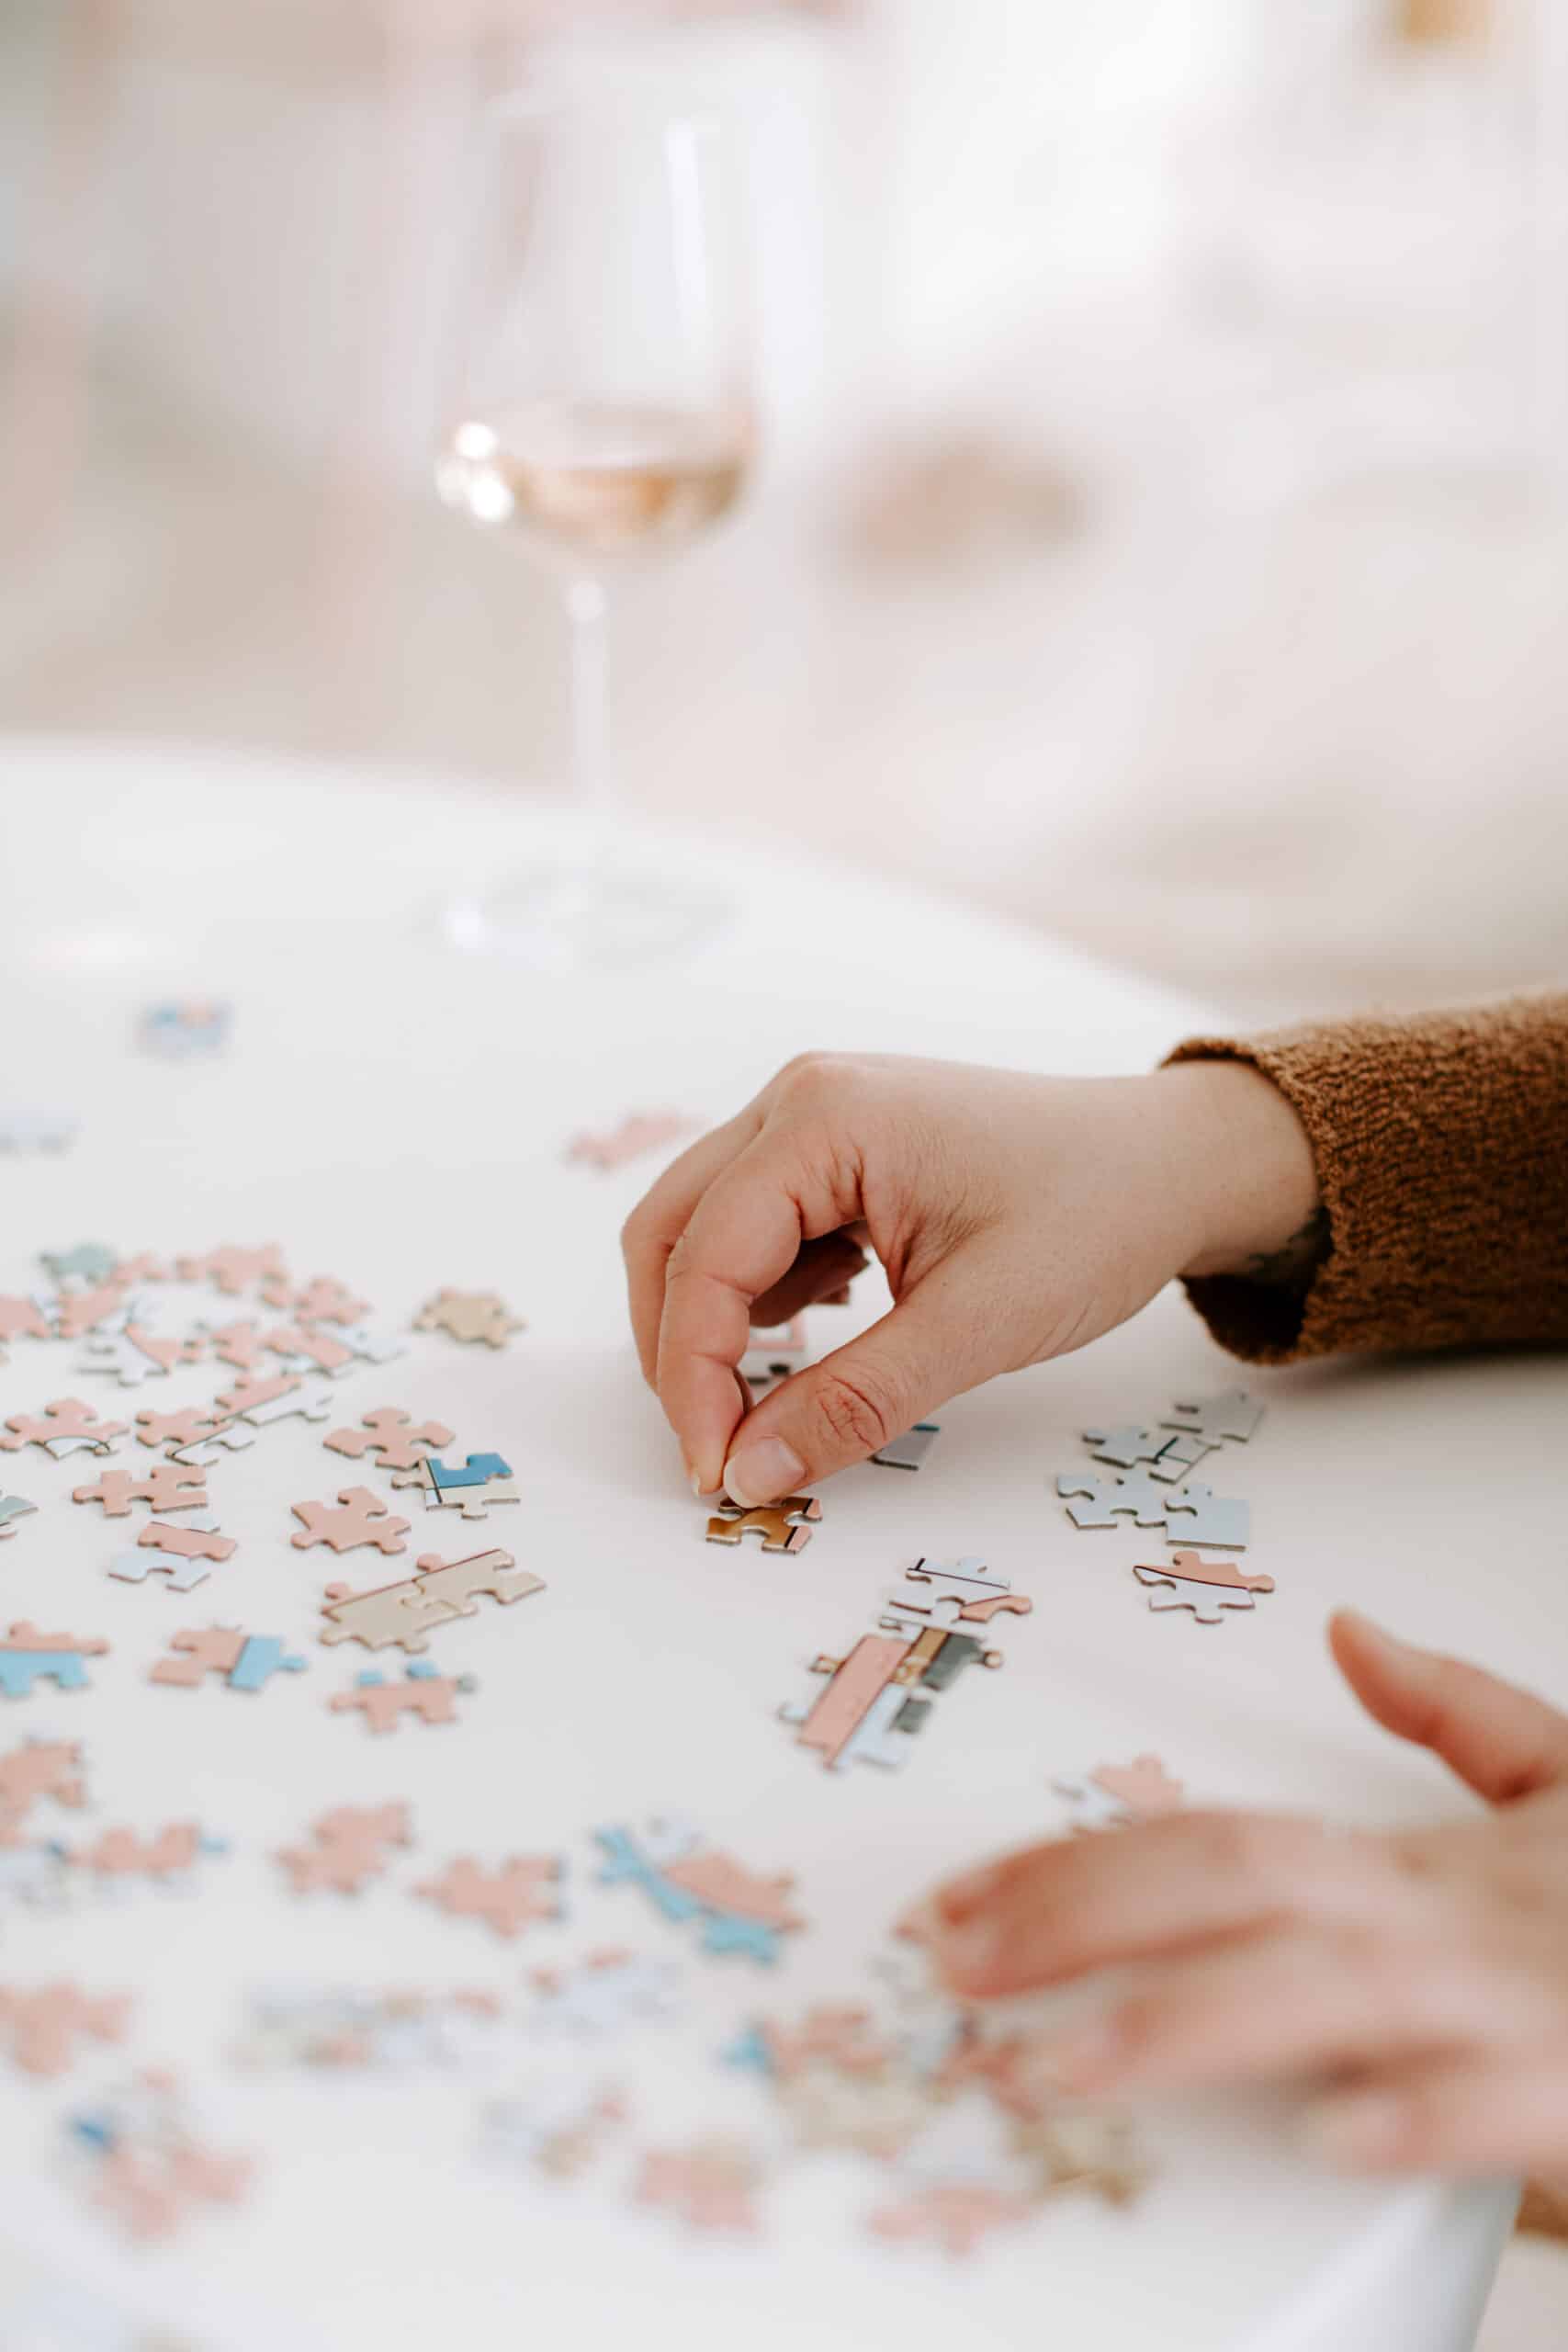 non-descript hands putting a puzzle together with a wine glass in the background